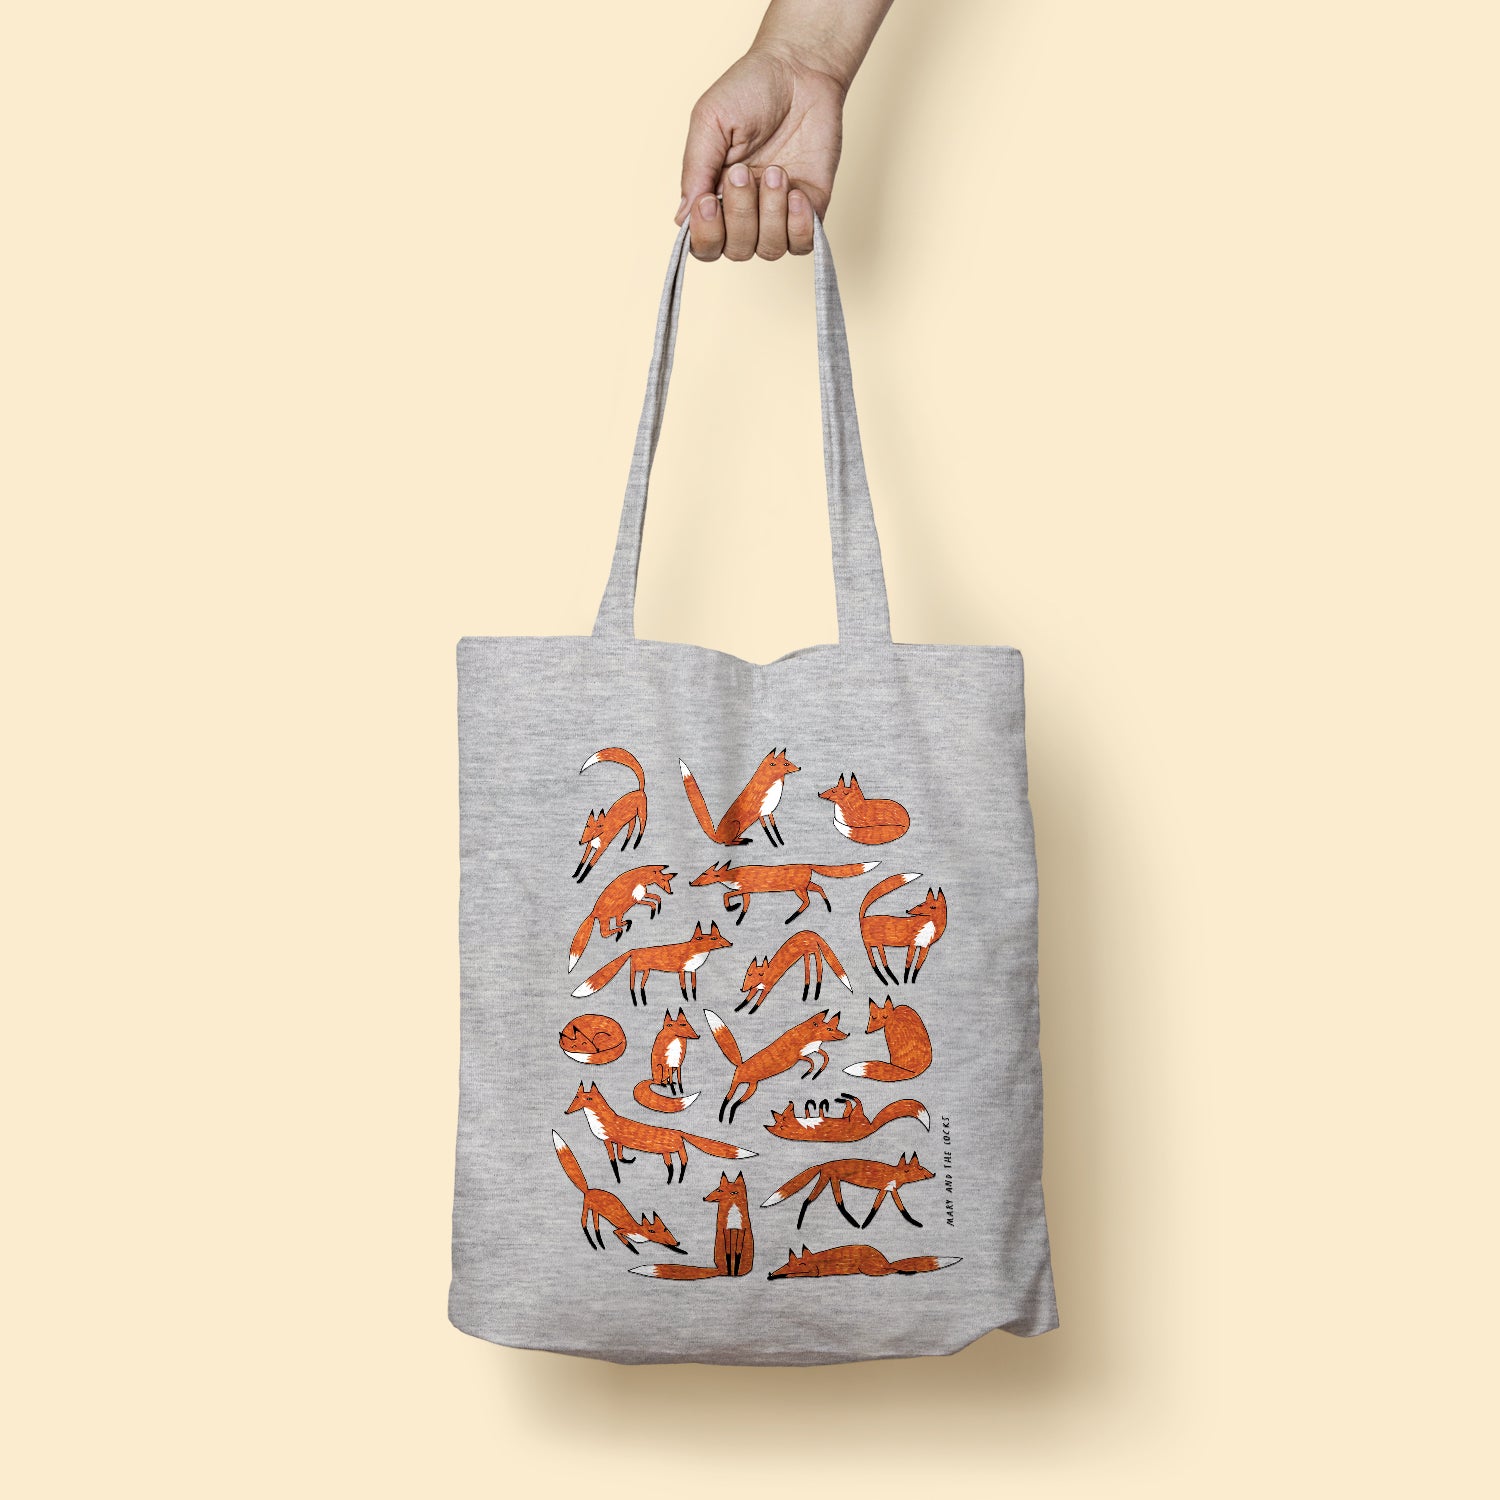 Tote Bag - Mary and The Locks